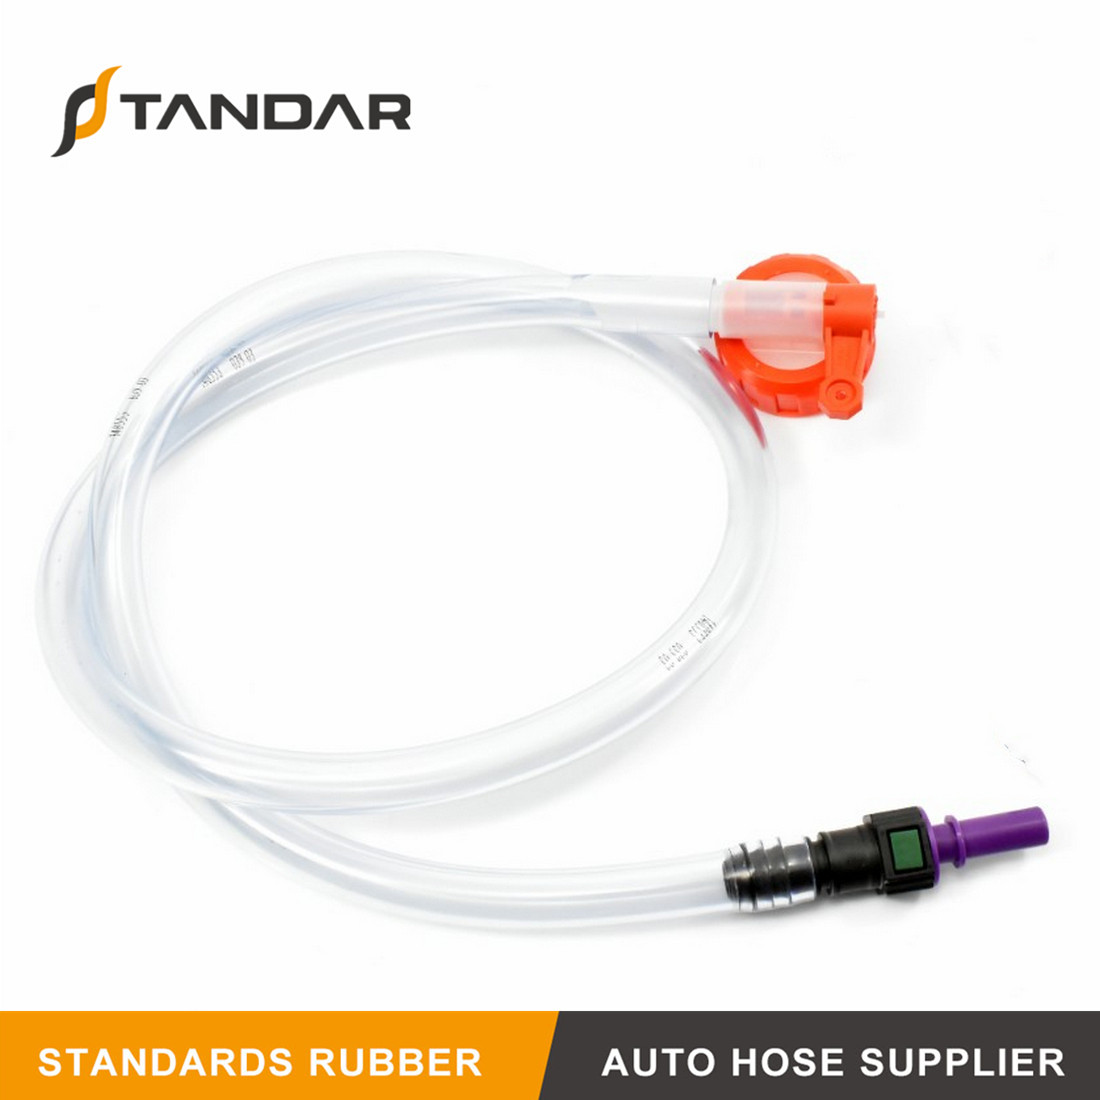 5/16" Fuel Line Quick Connector Used For CITROEN/ PEUGEOT/ FORD Additive DPF FAP Transfer